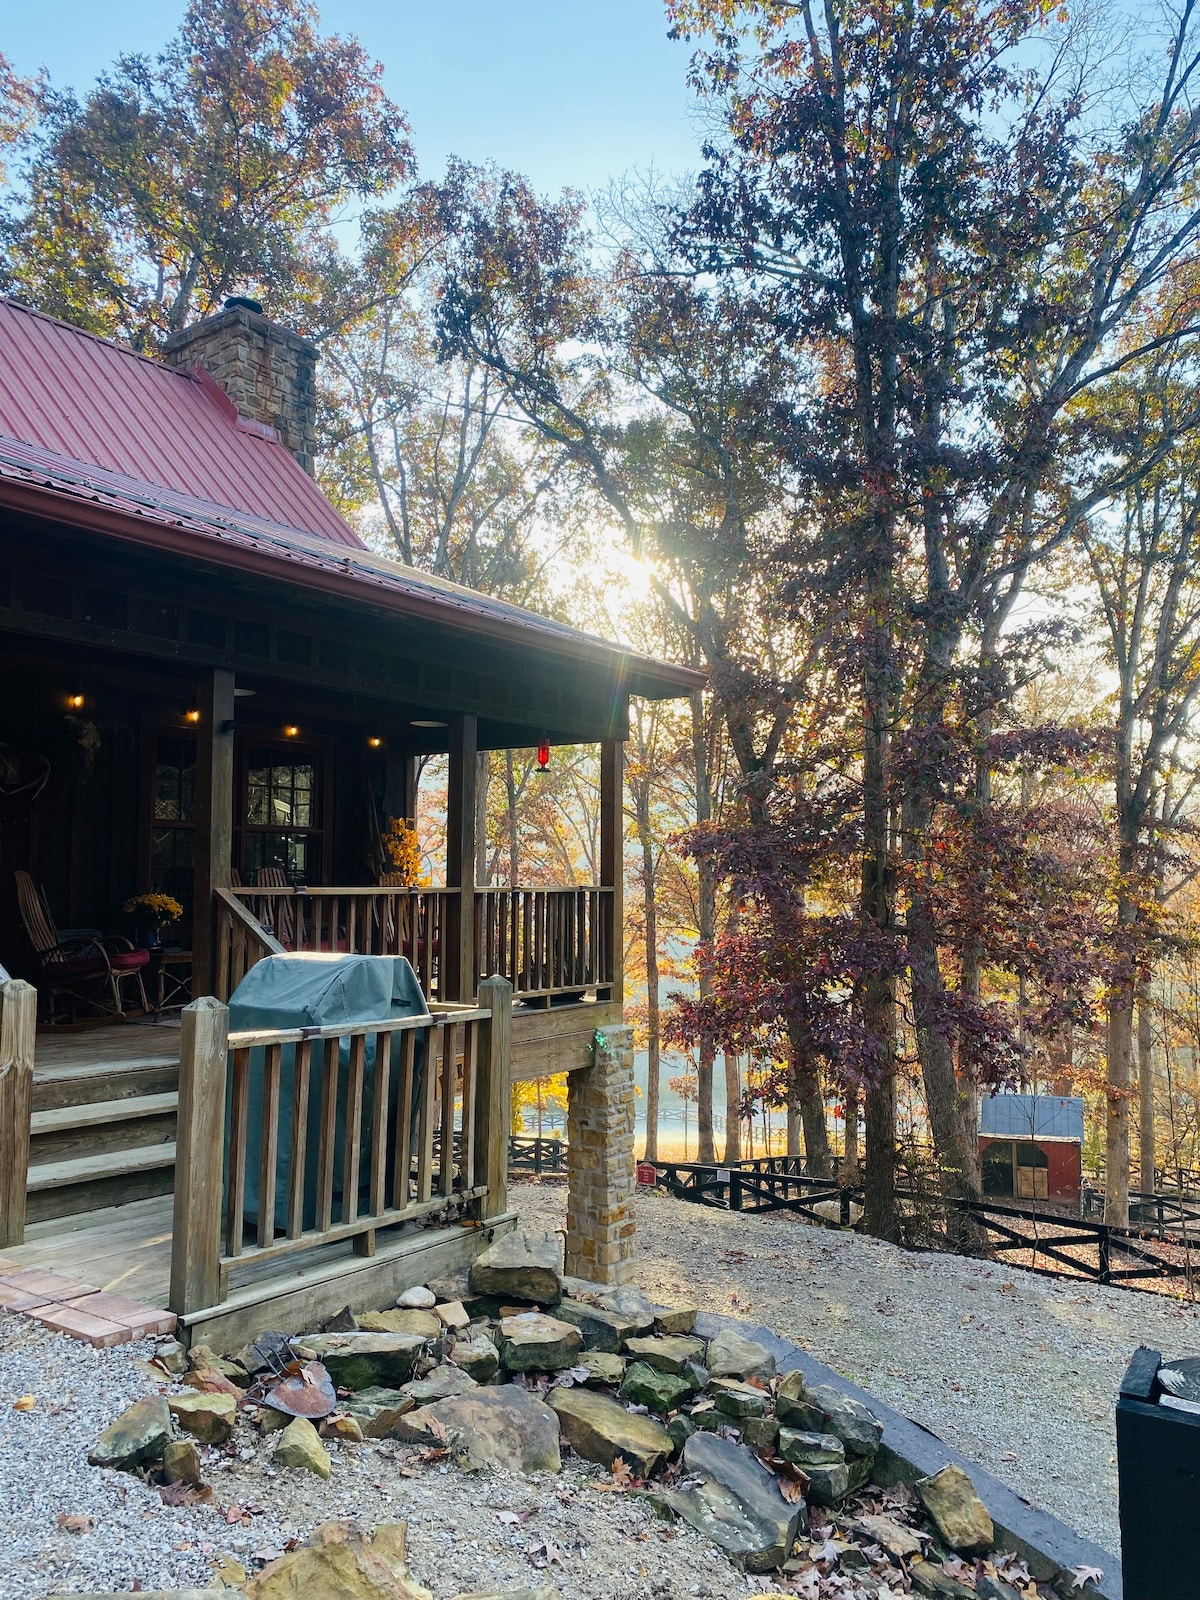 3R Ranch Guest Cabin Rental In Brown County, IN